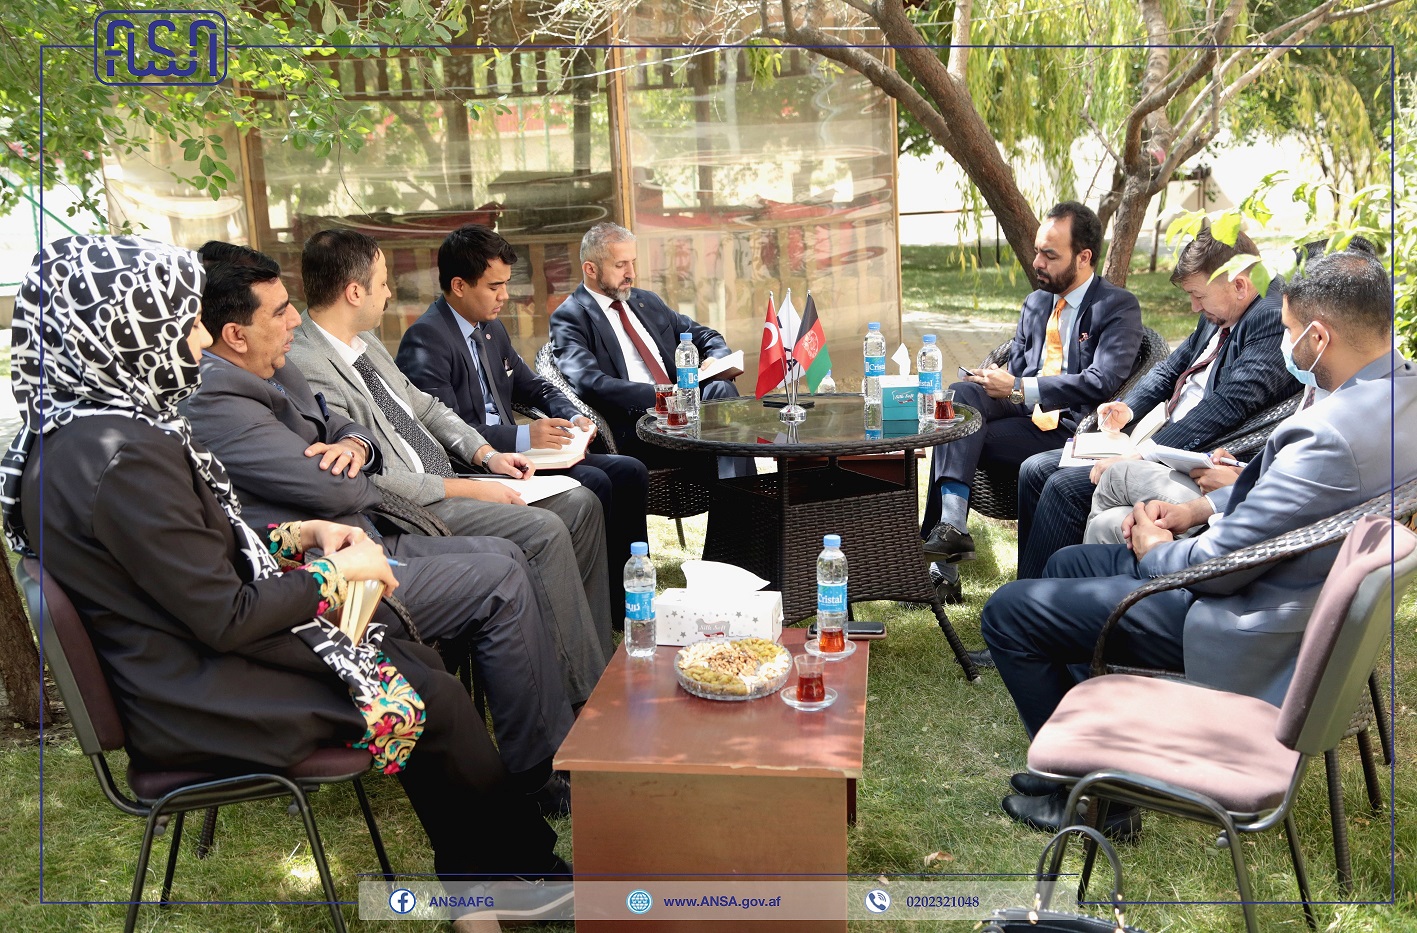 Afghanistan National Standards Authority held a joint meeting for bilateral cooperation between the agency of Coordination and Cooperation of the Islamic Republic of Turkey (TIKA).